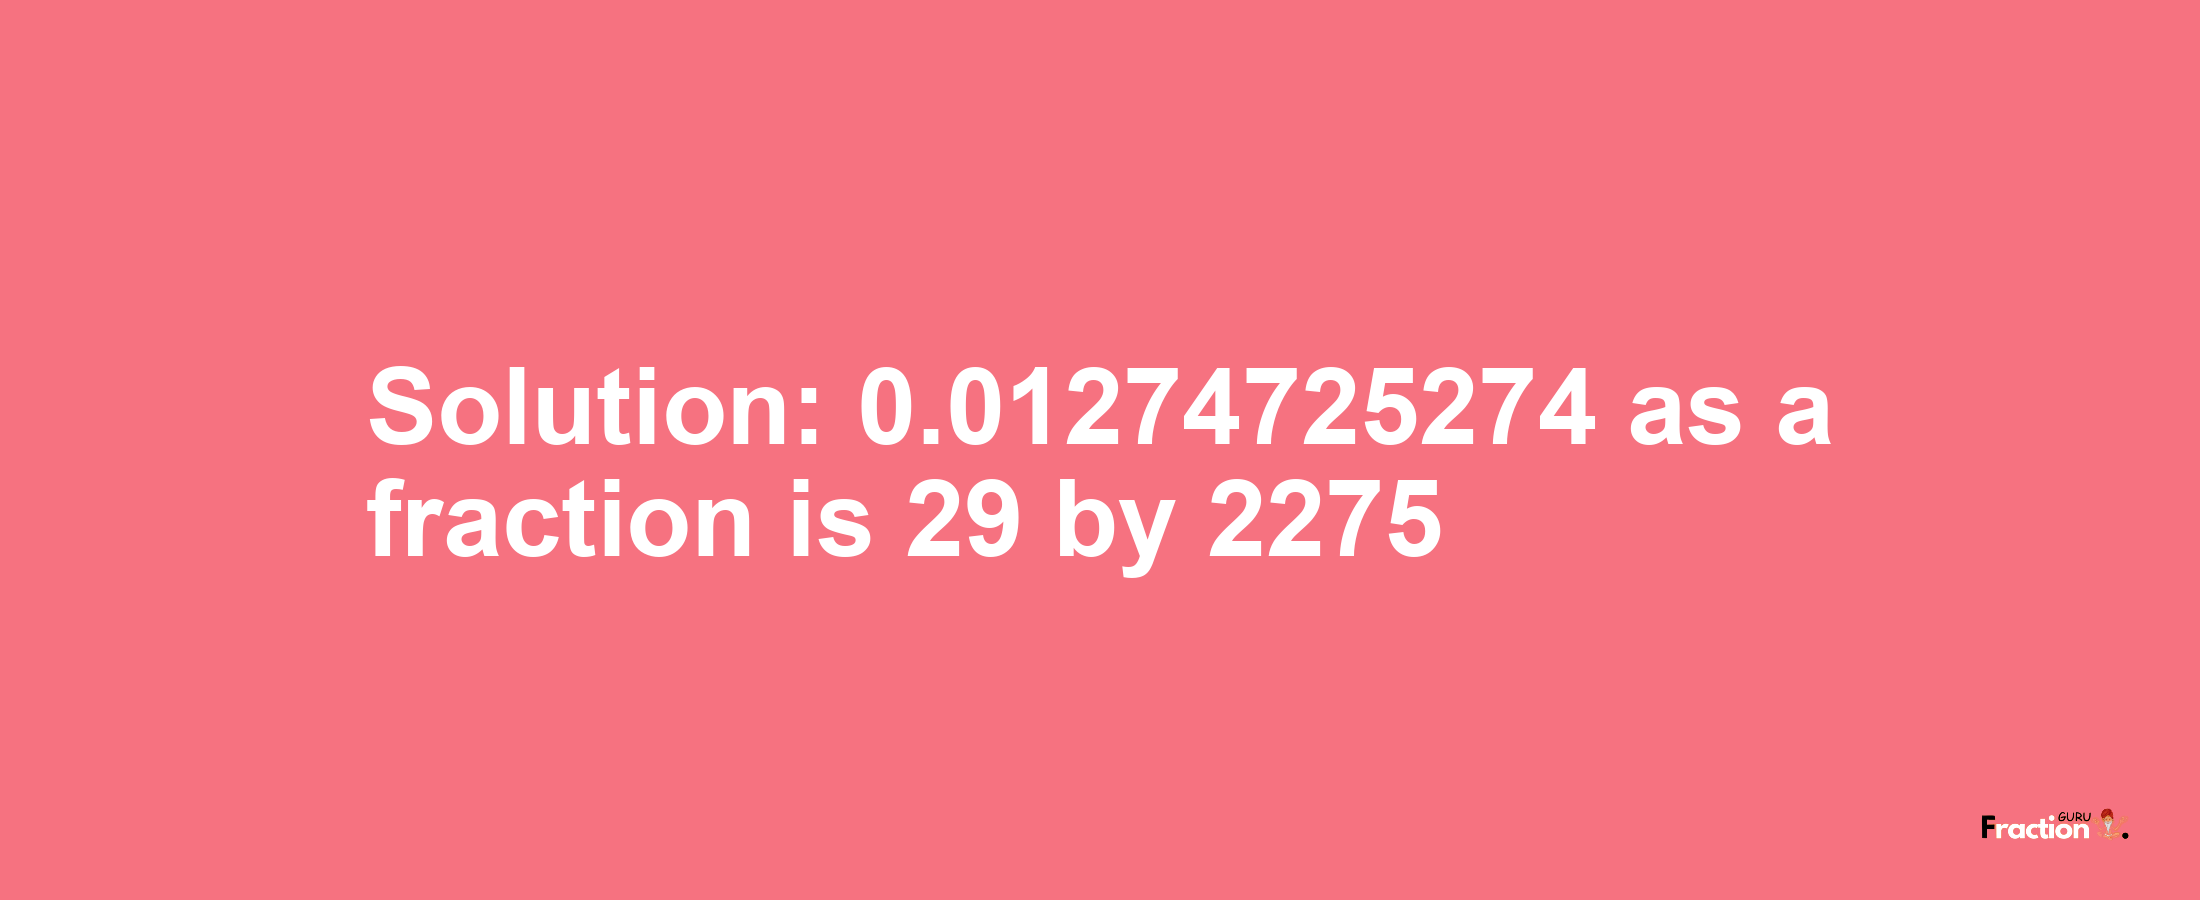 Solution:0.01274725274 as a fraction is 29/2275